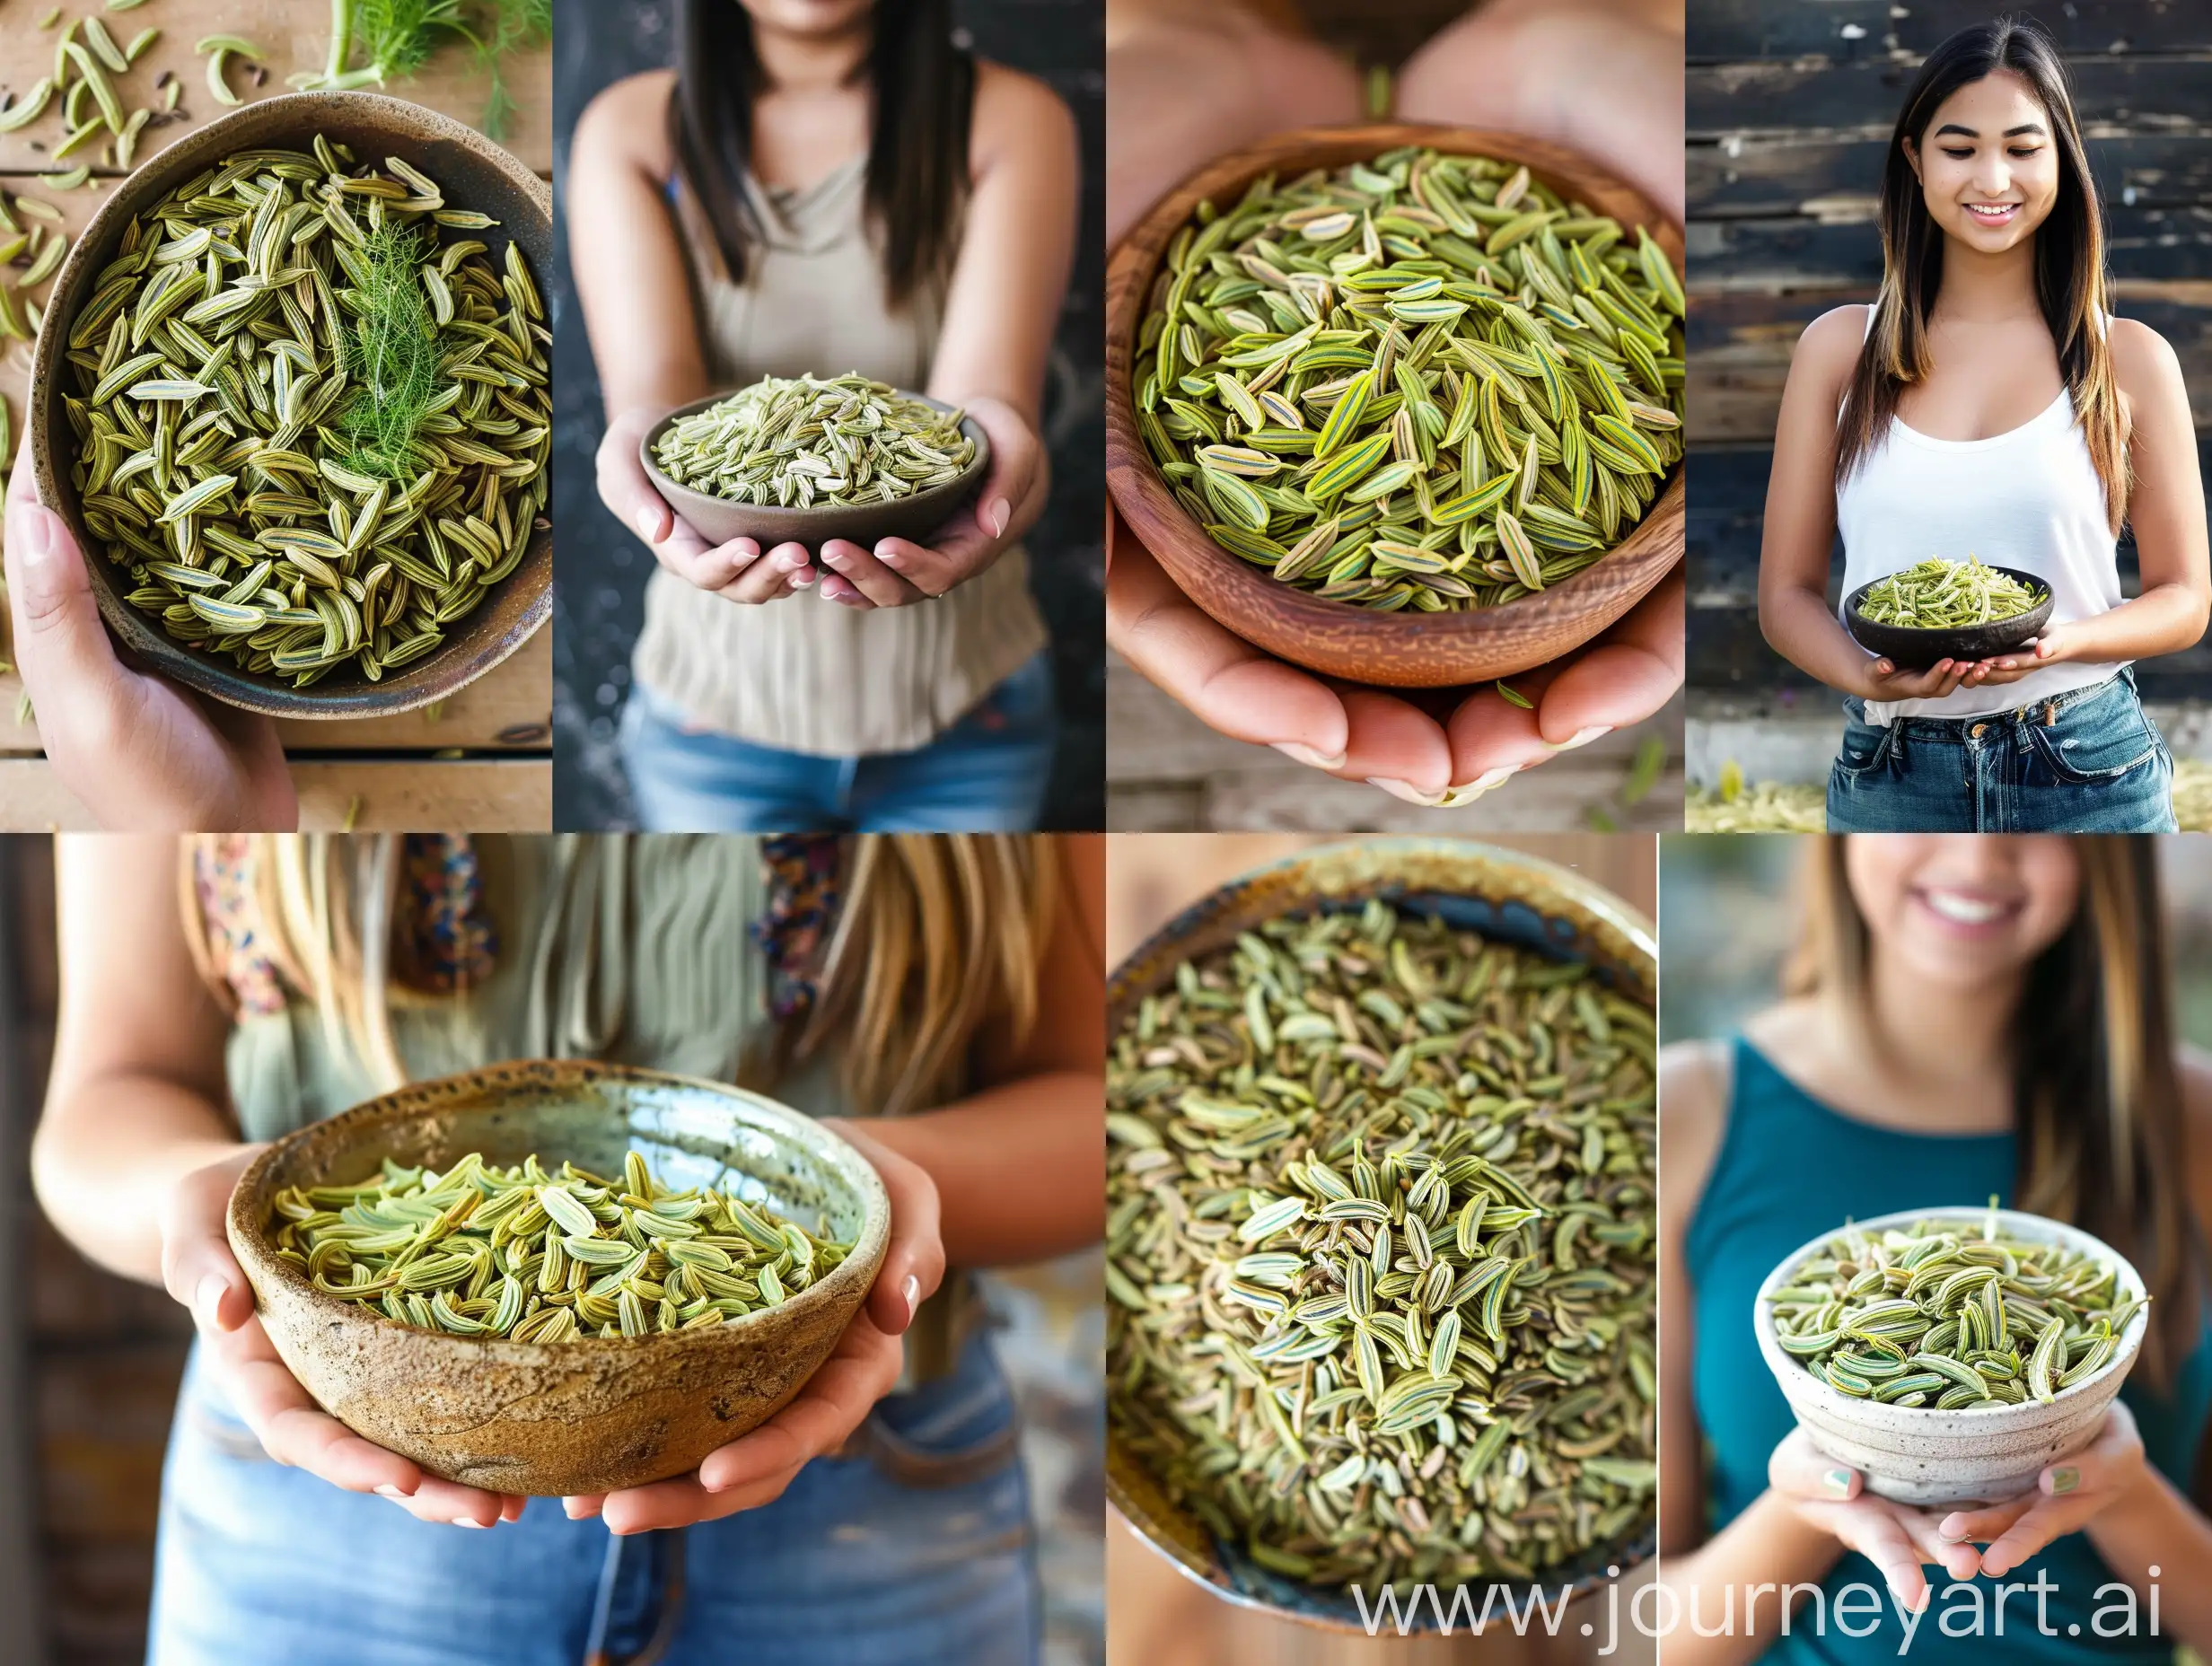 Woman-Holding-a-Bowl-of-Fennel-Seeds